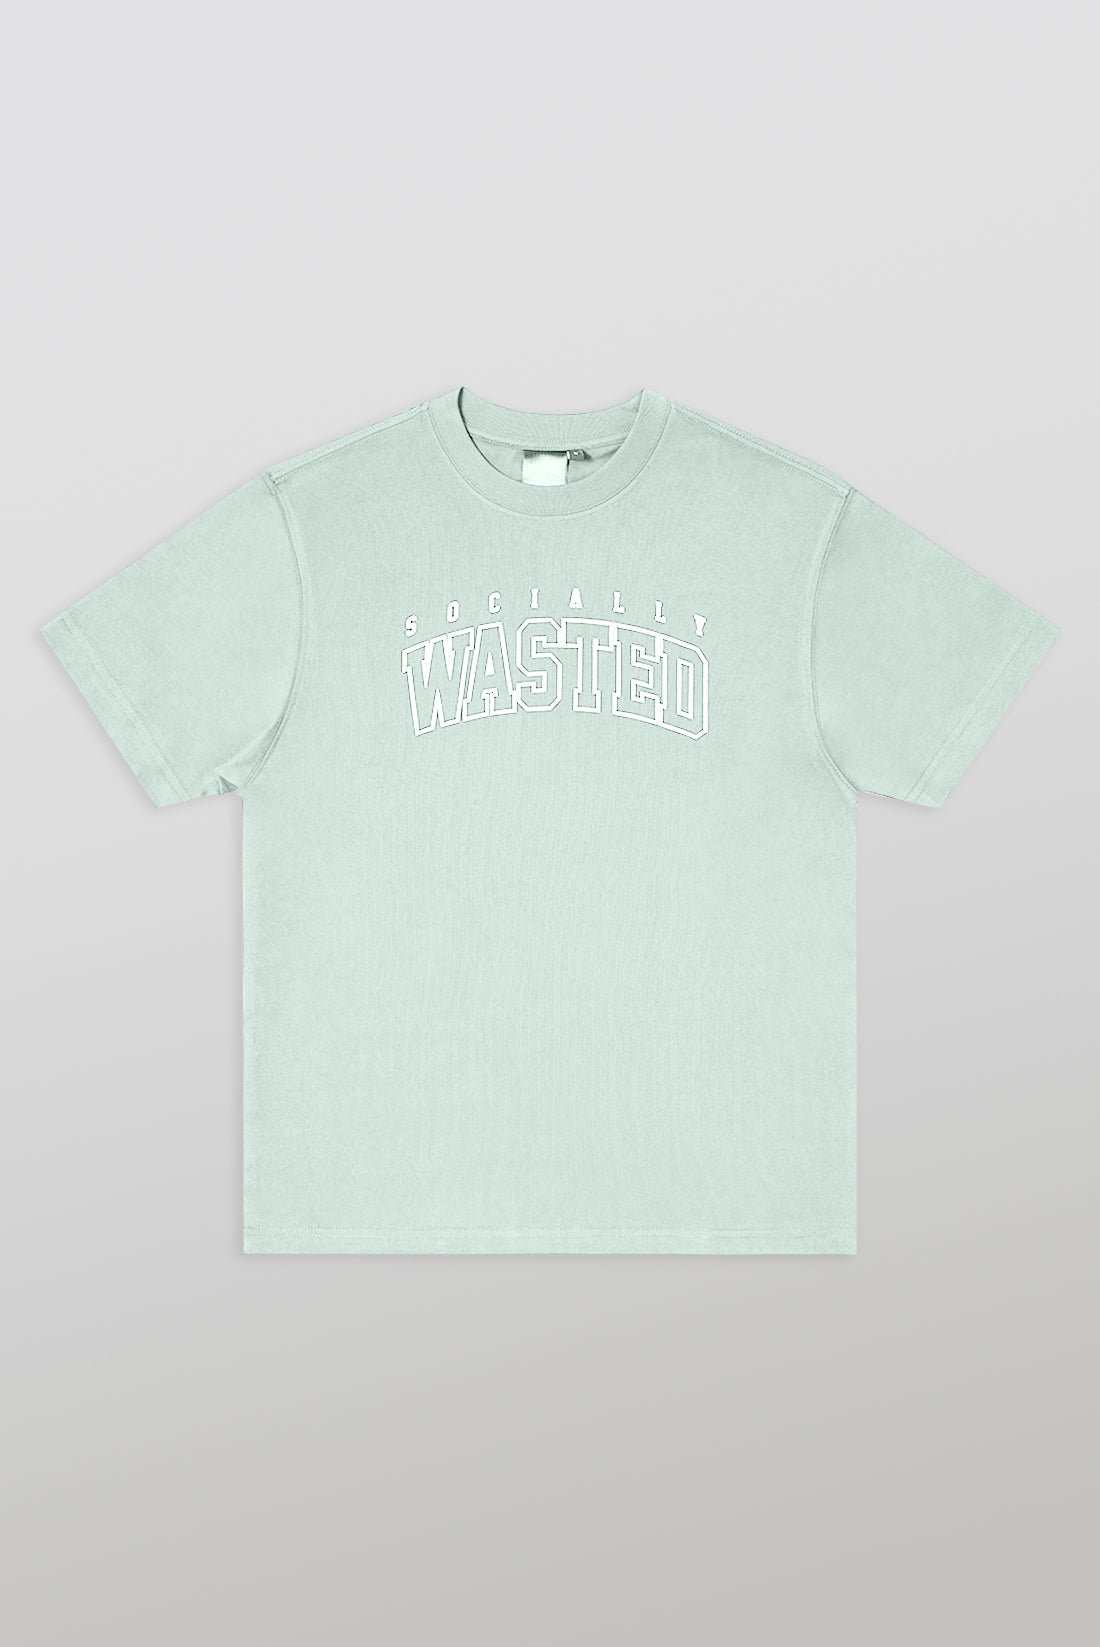 
                  
                    Socially Wasted Flagship Sky Blue
                  
                